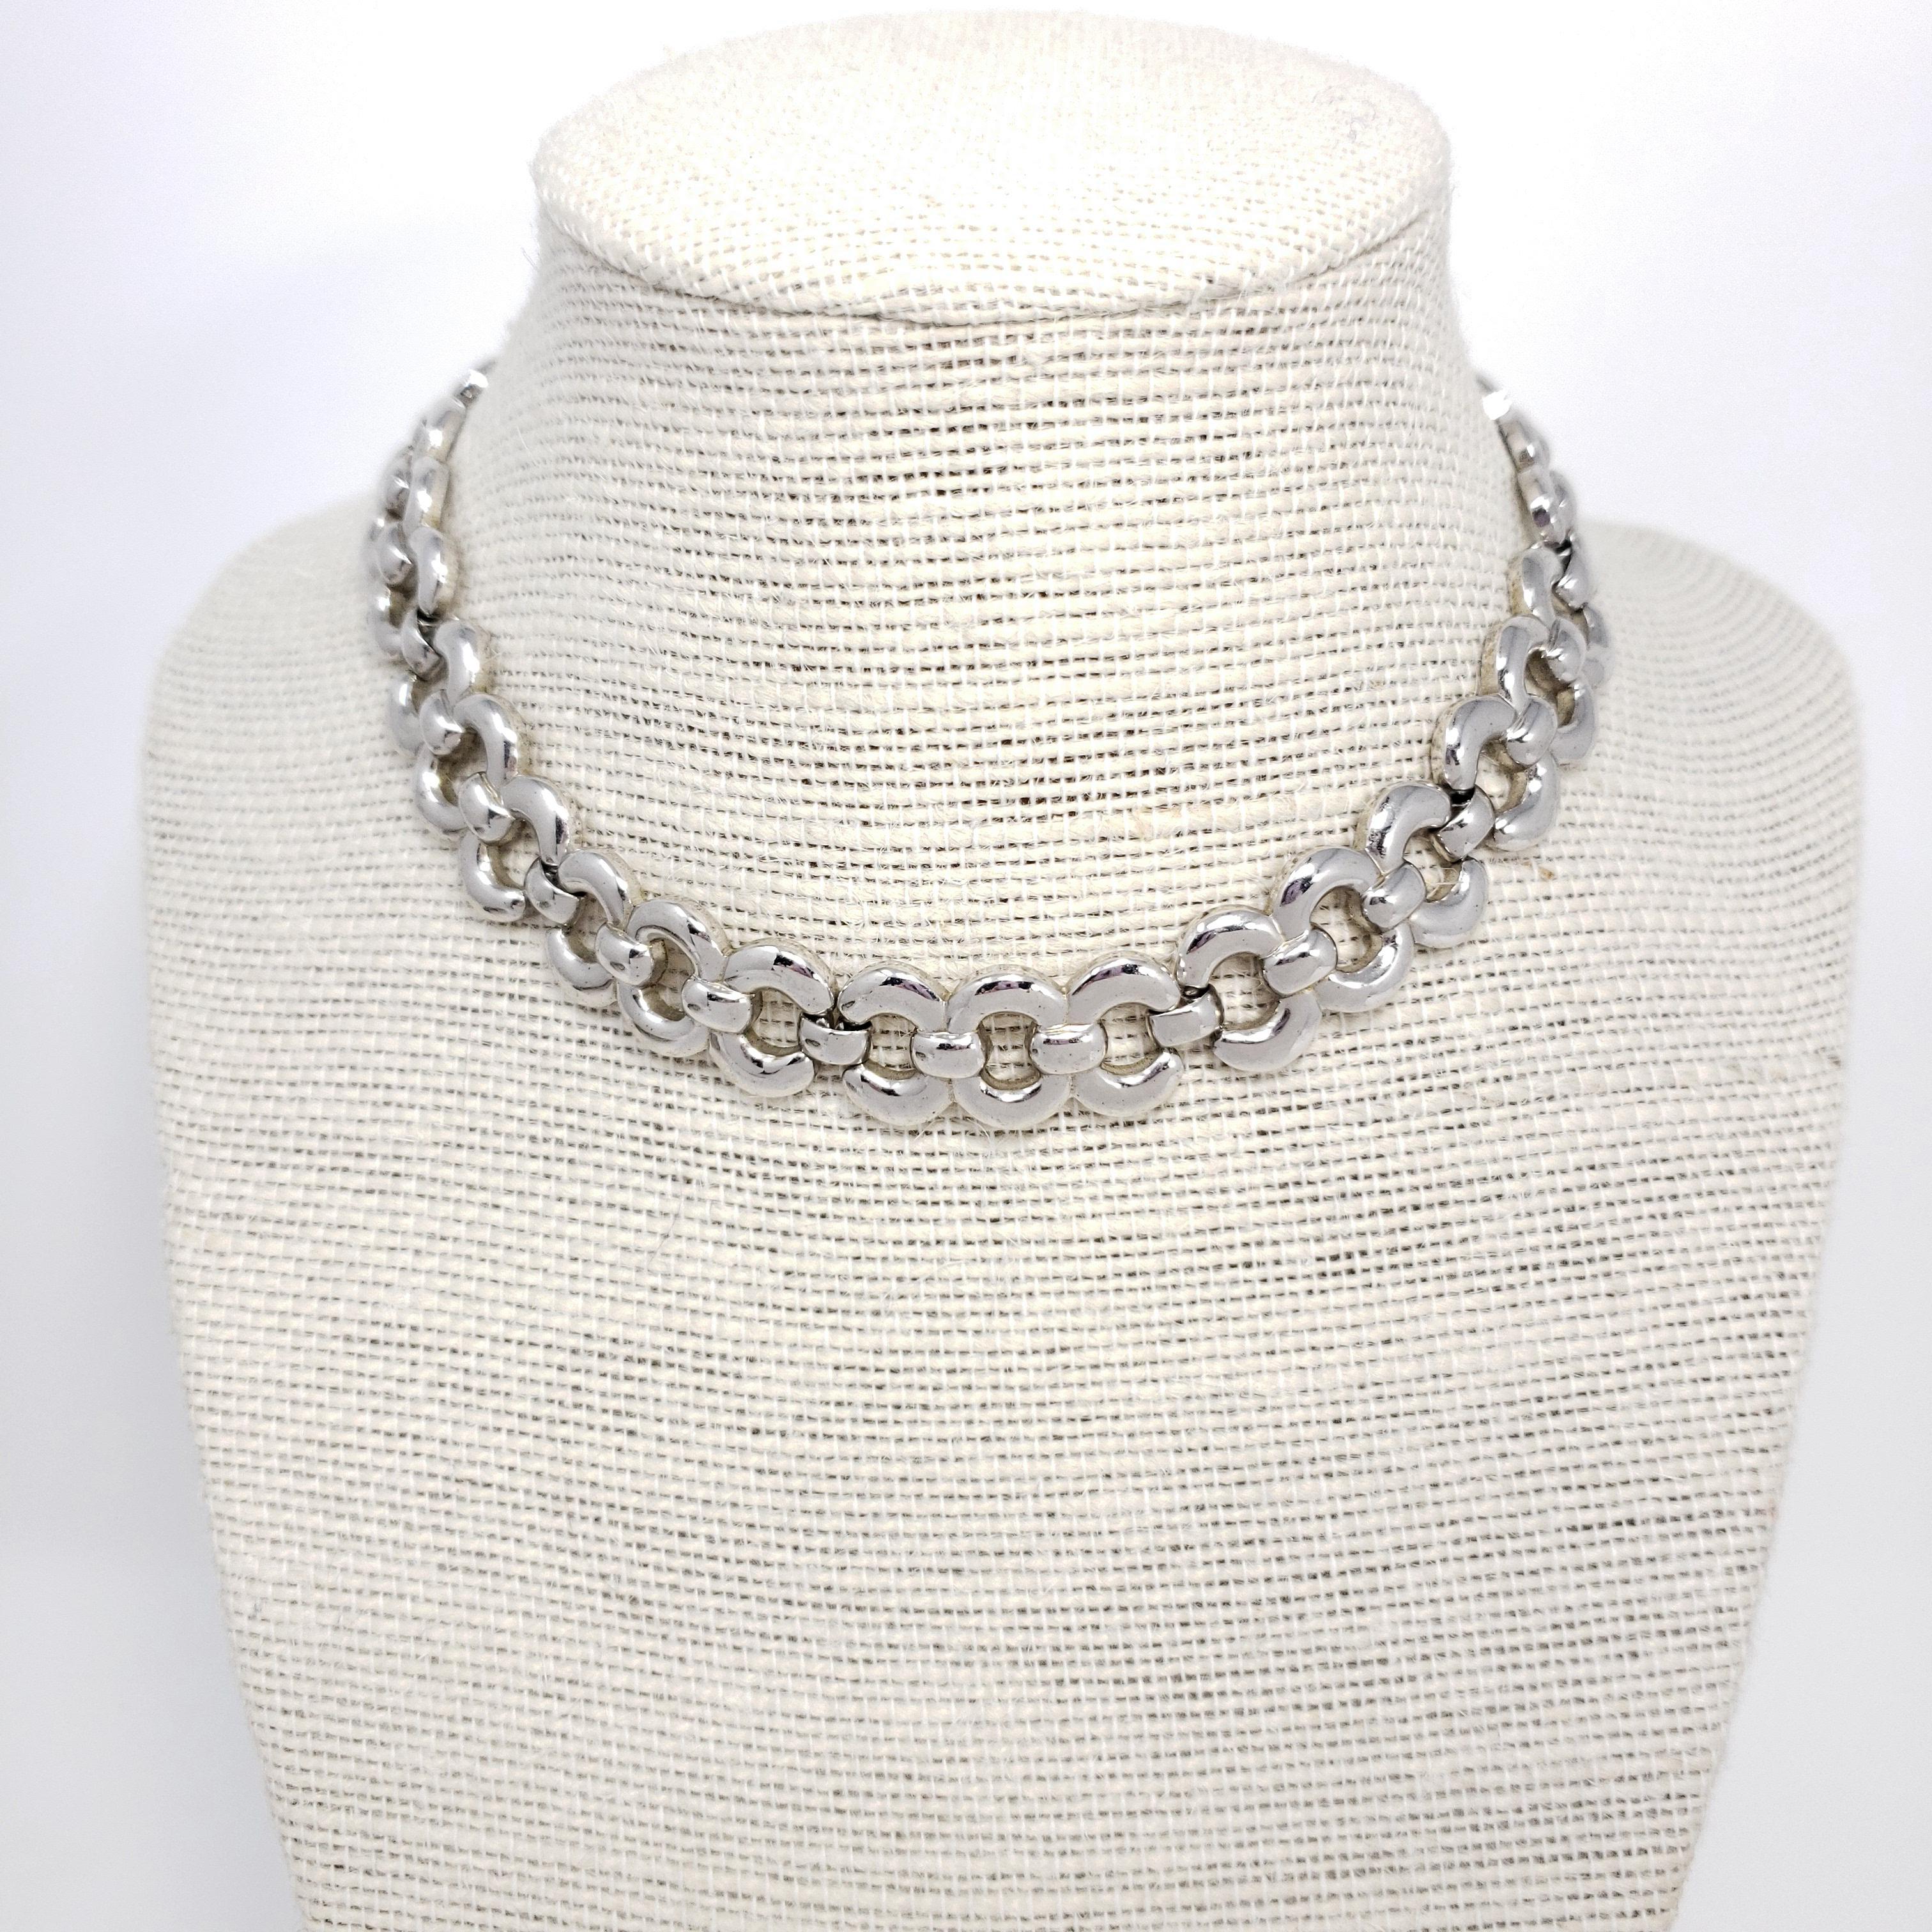 Stylish vintage Napier necklace, featuring chunky silver-tone links for a bold, glamorous look!

Marks / hallmarks / etc: Napier

12 to 14 inches w/ extension chain.